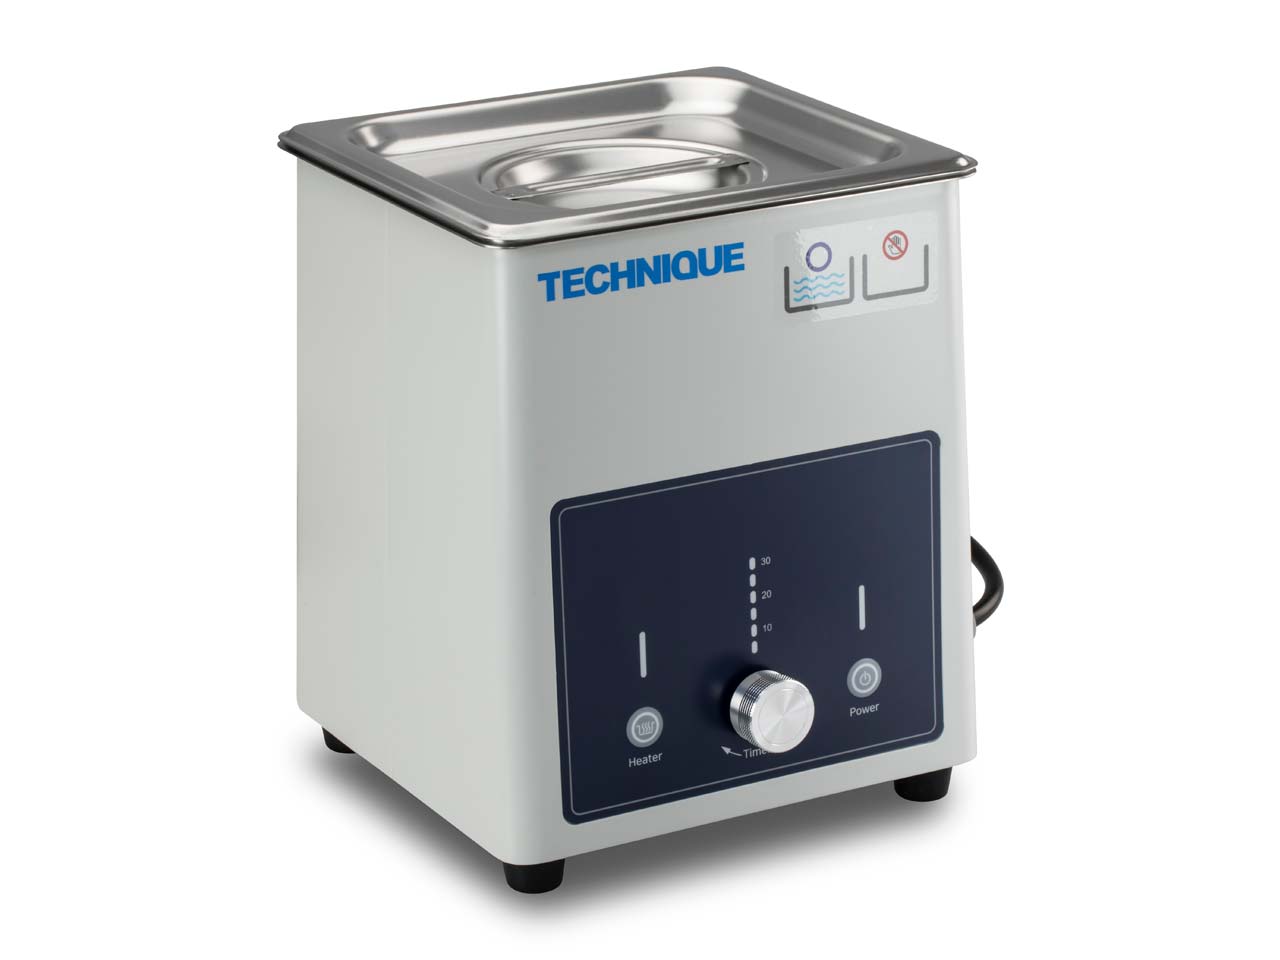 Do you have instructions for Technique Ultrasonic 1.8 Litre Stainless Steel, New Model?